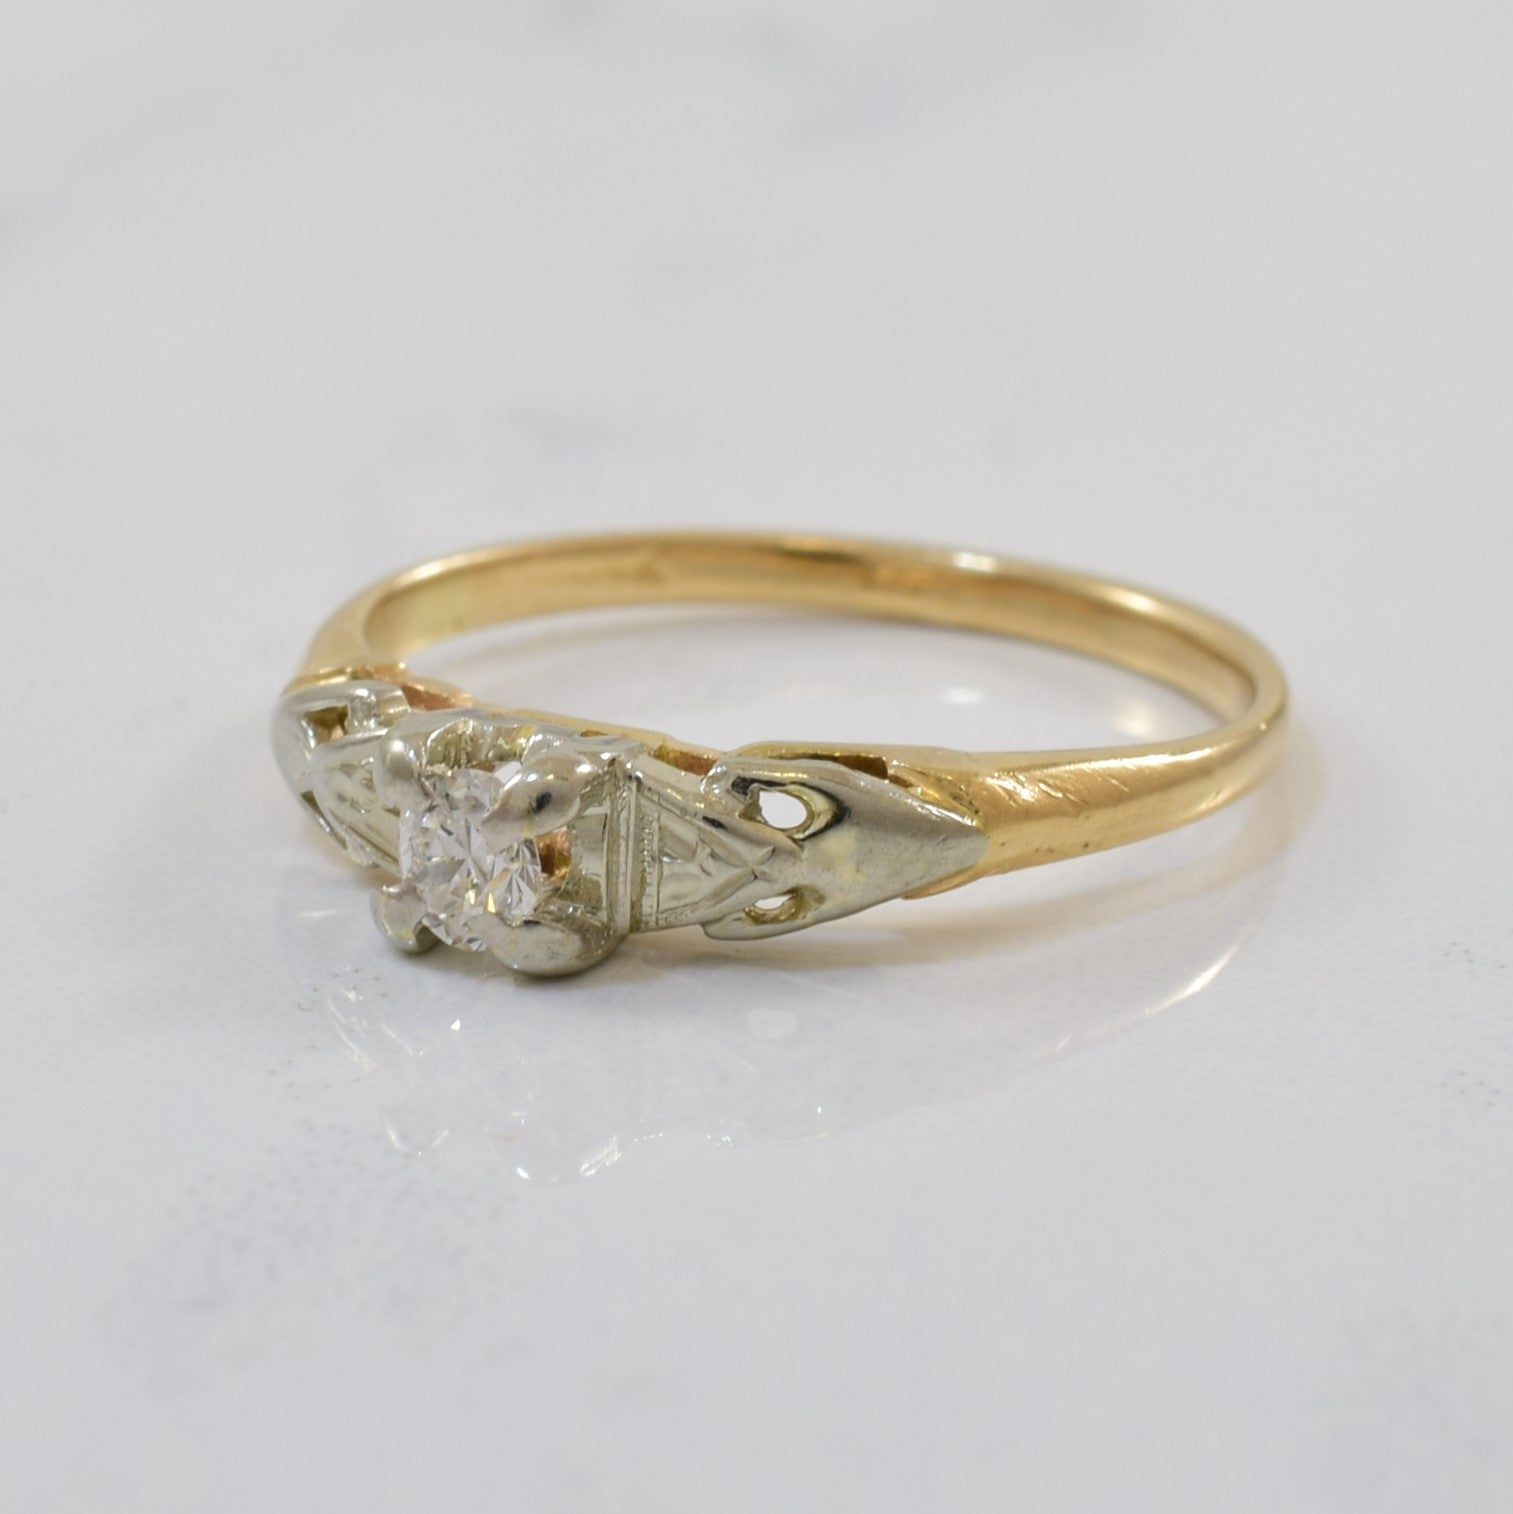 Early 1930s Solitaire Diamond Ring | 0.12ct | SZ 6 |